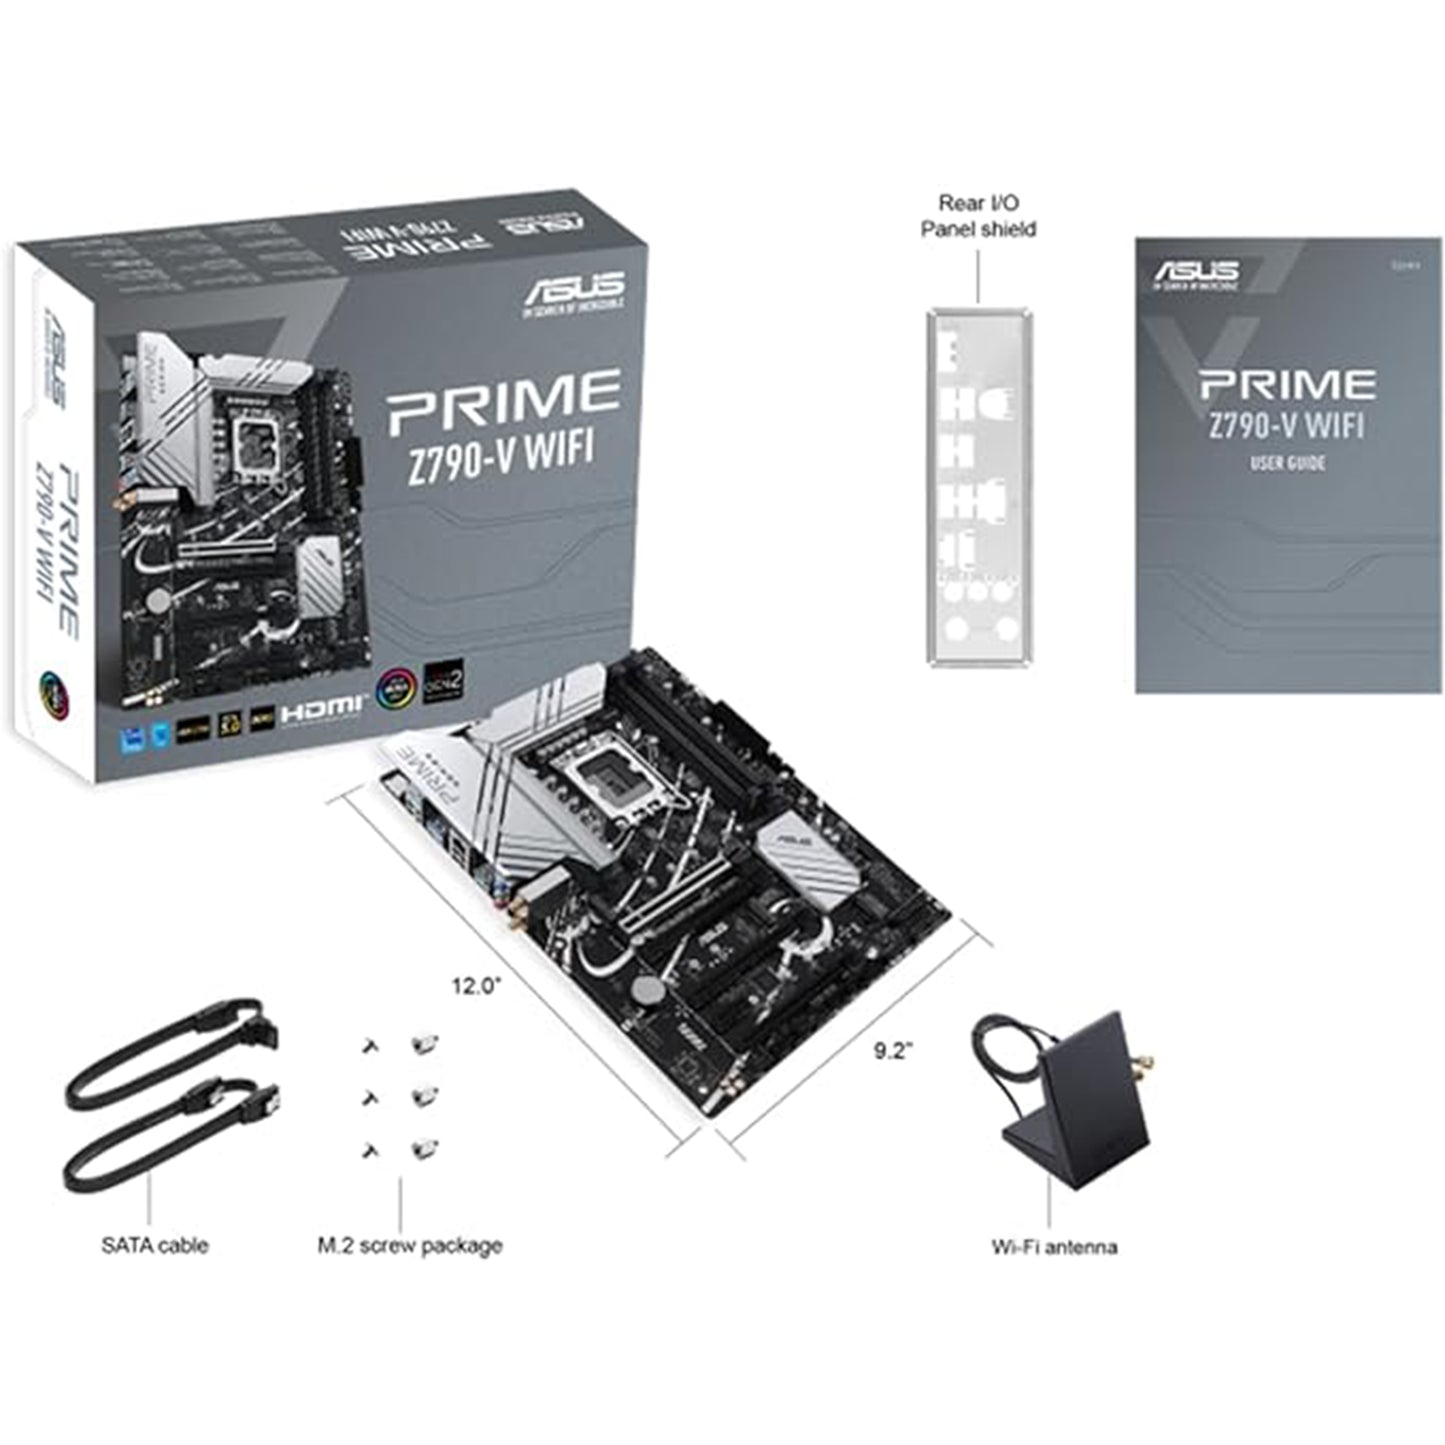 Micro Center Intel Core i7-12700K 12 (8P+4E) Cores up to 5.0 GHz Unlocked Desktop Processor with Integrated Intel UHD Graphics 770 Bundle with ASUS Prime Z790-P WiFi DDR5 ATX Gaming Motherboard